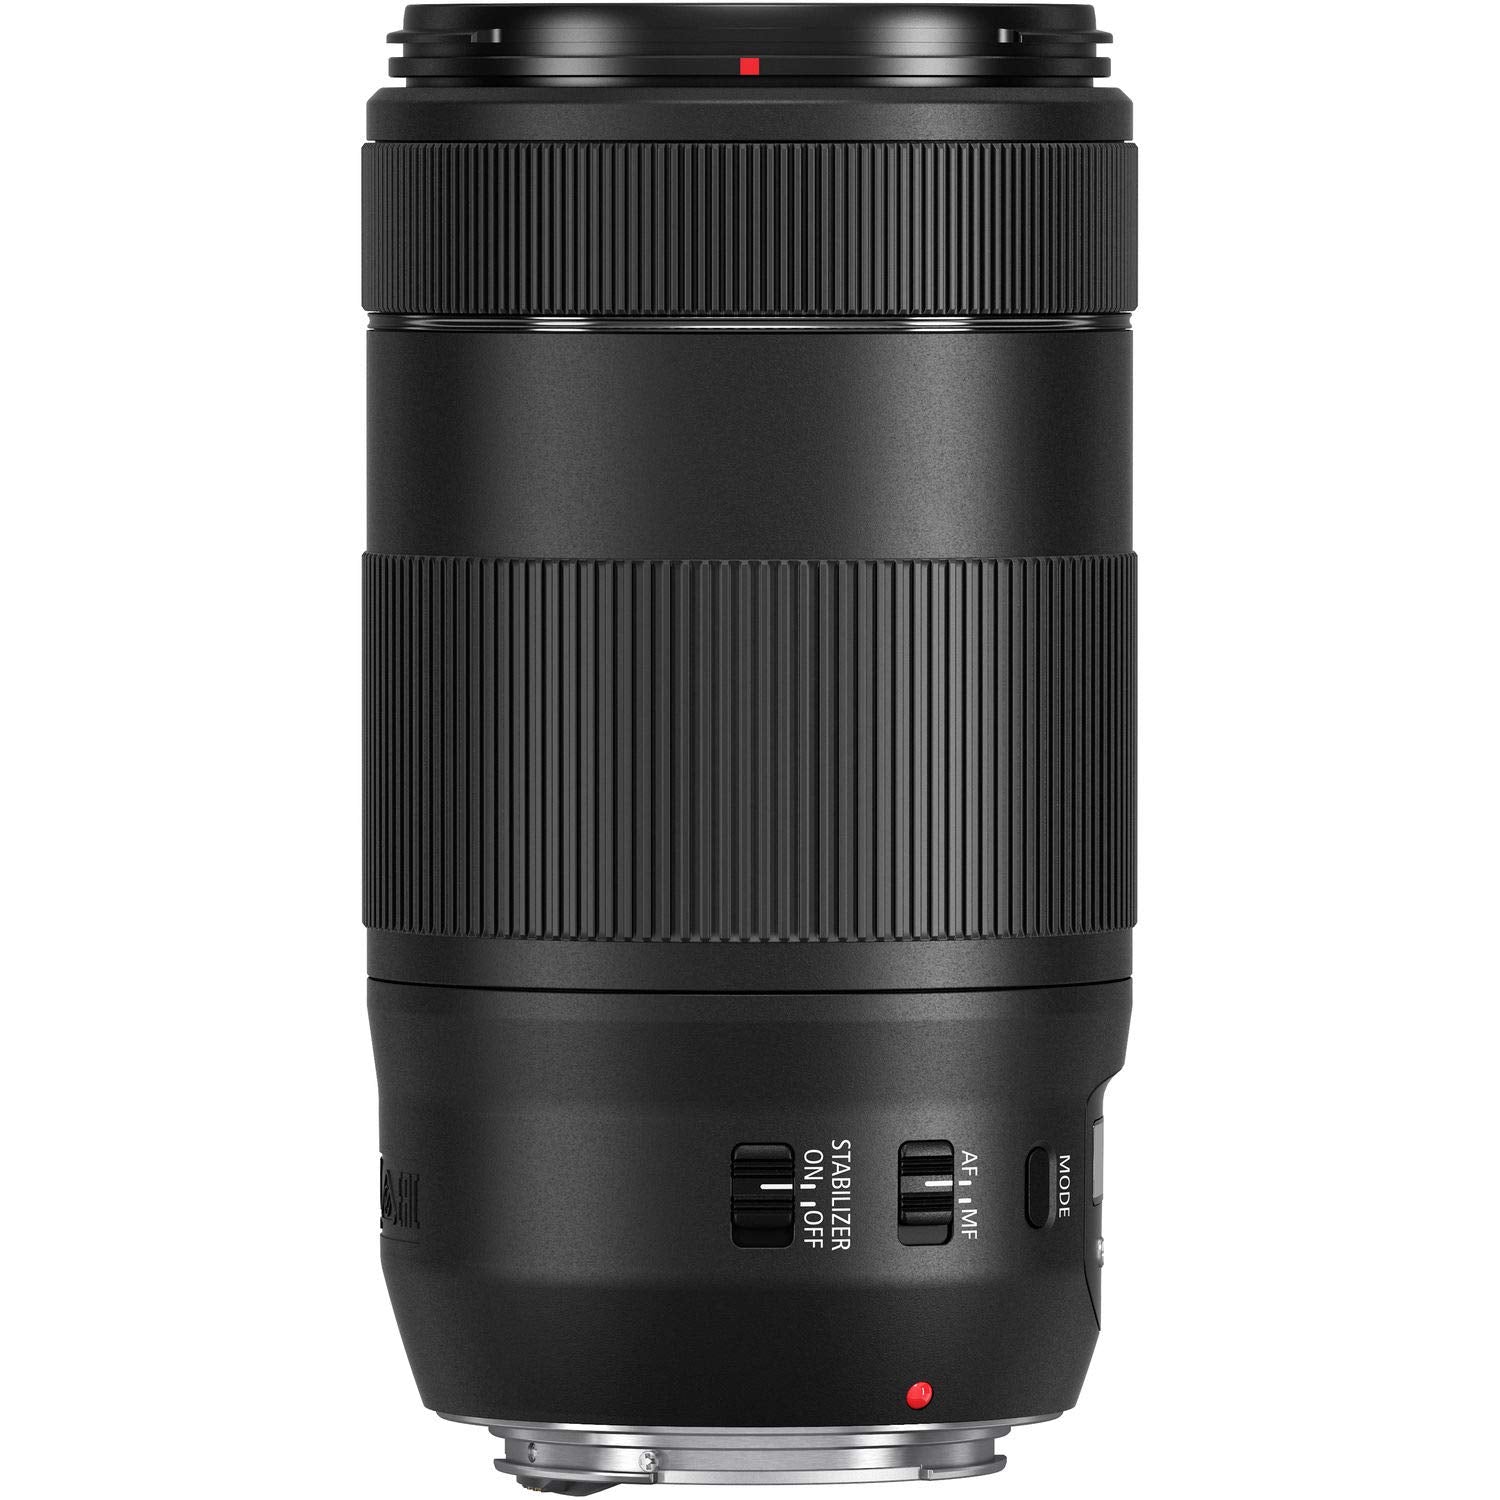 Canon EF 70-300mm f/4-5.6 is II USM Lens for Canon EF Mount + Accessories (International Model with 2 Year Warranty)